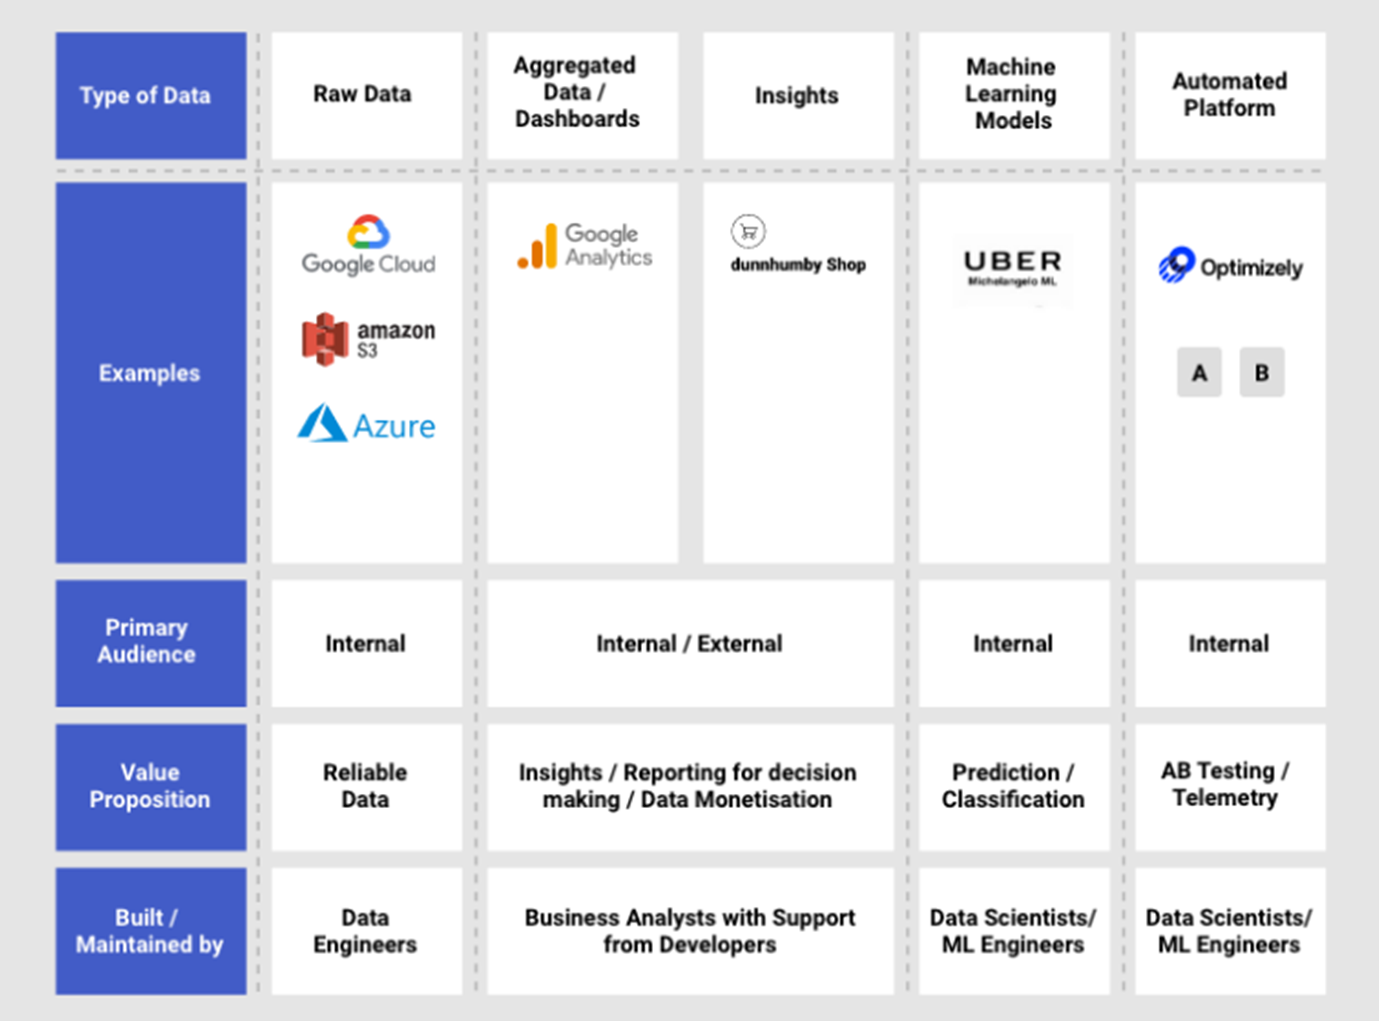 data products for processing raw data, insights, machine learning models and automation